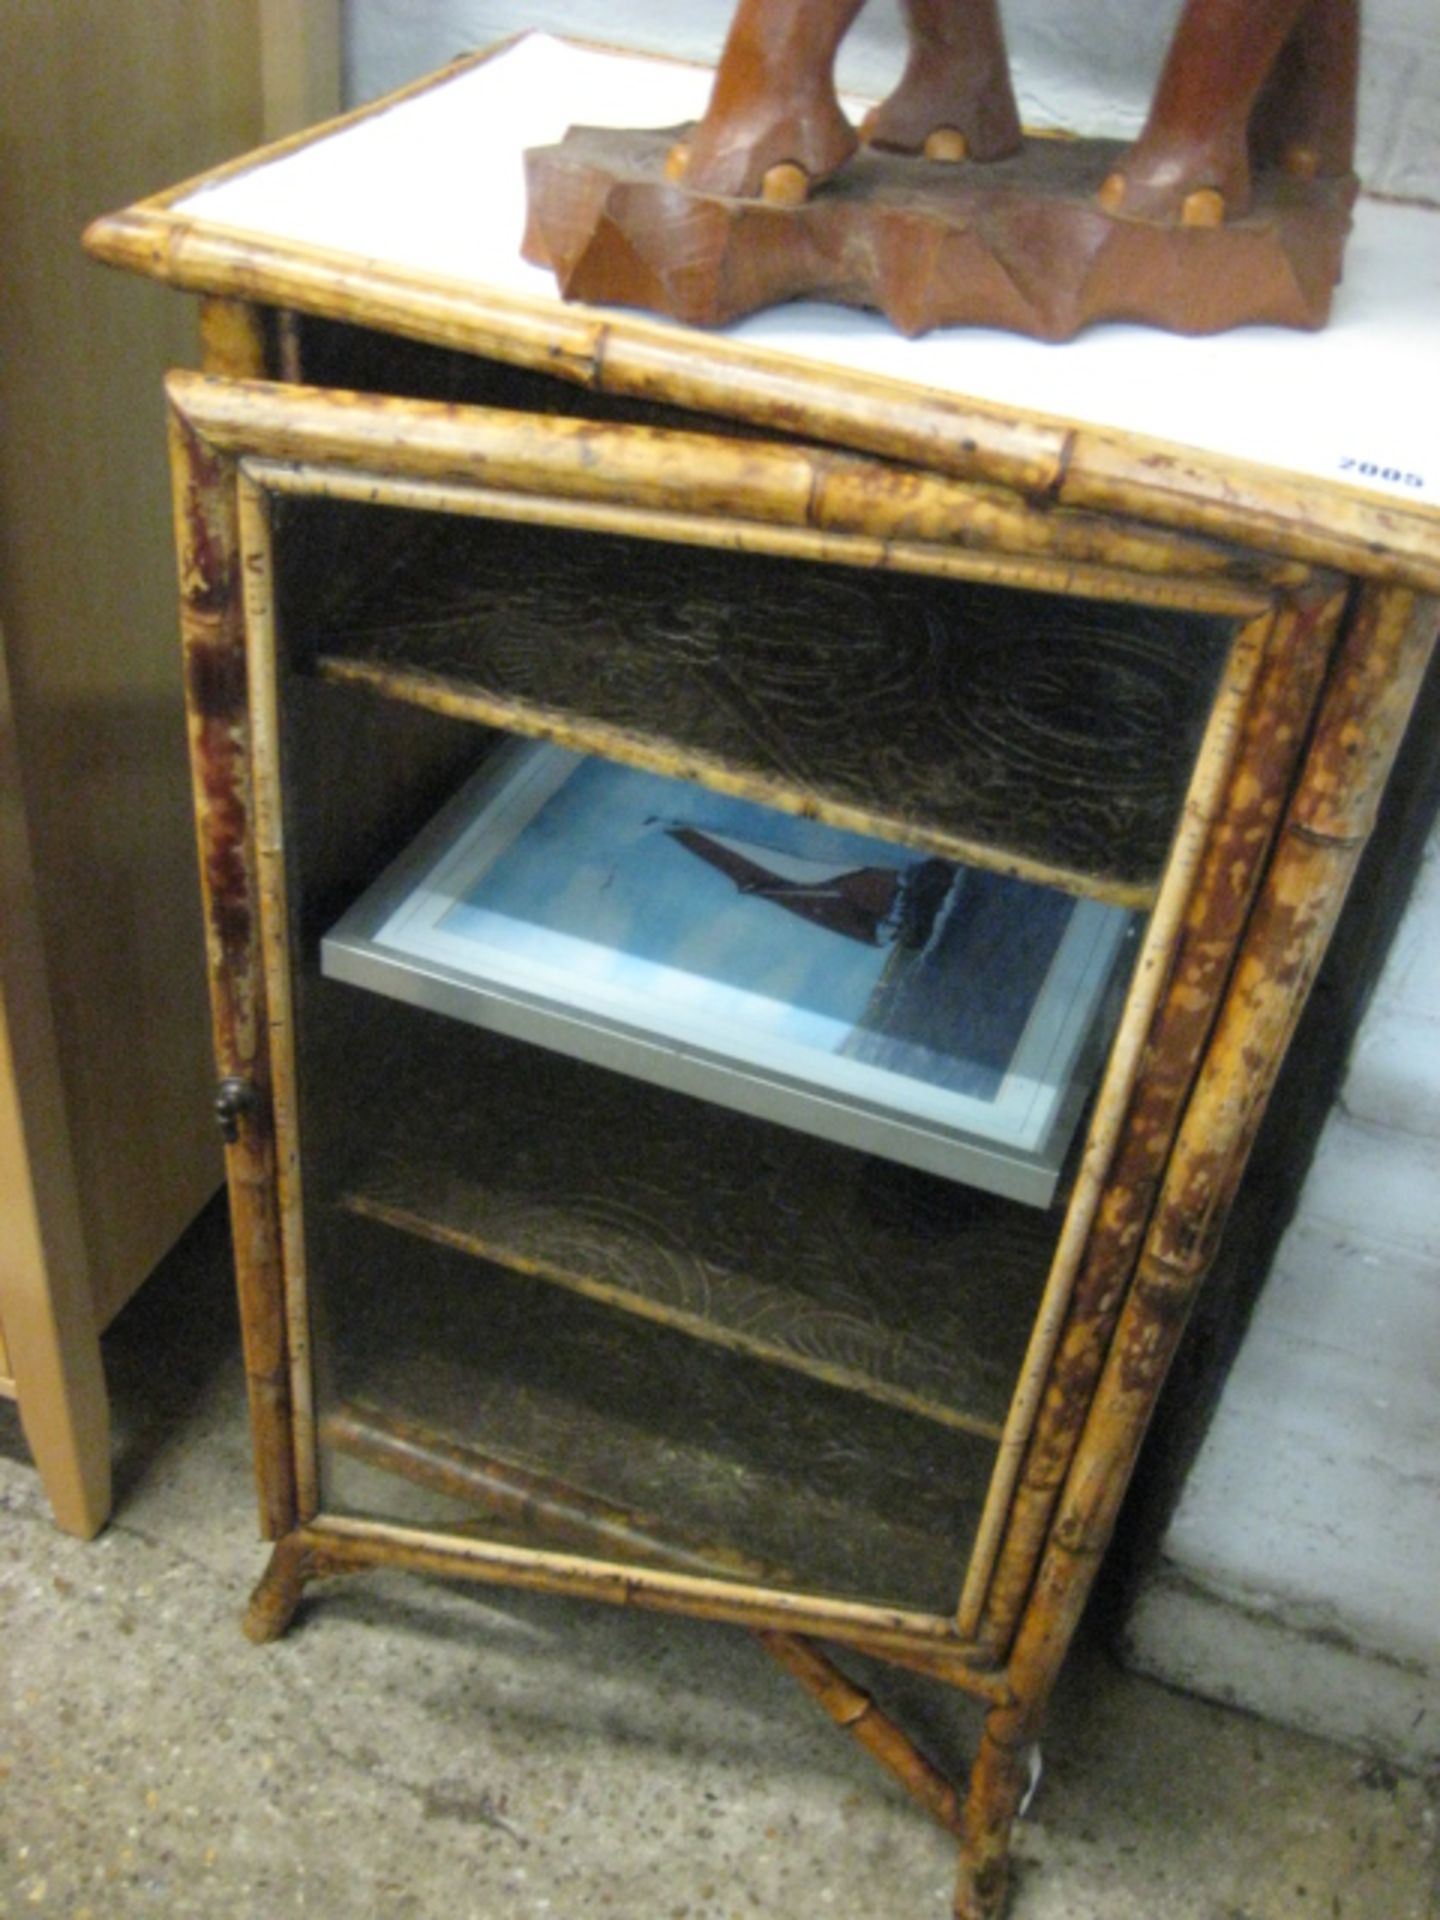 Bamboo and glazed cabinet with framed picture of sailing ship